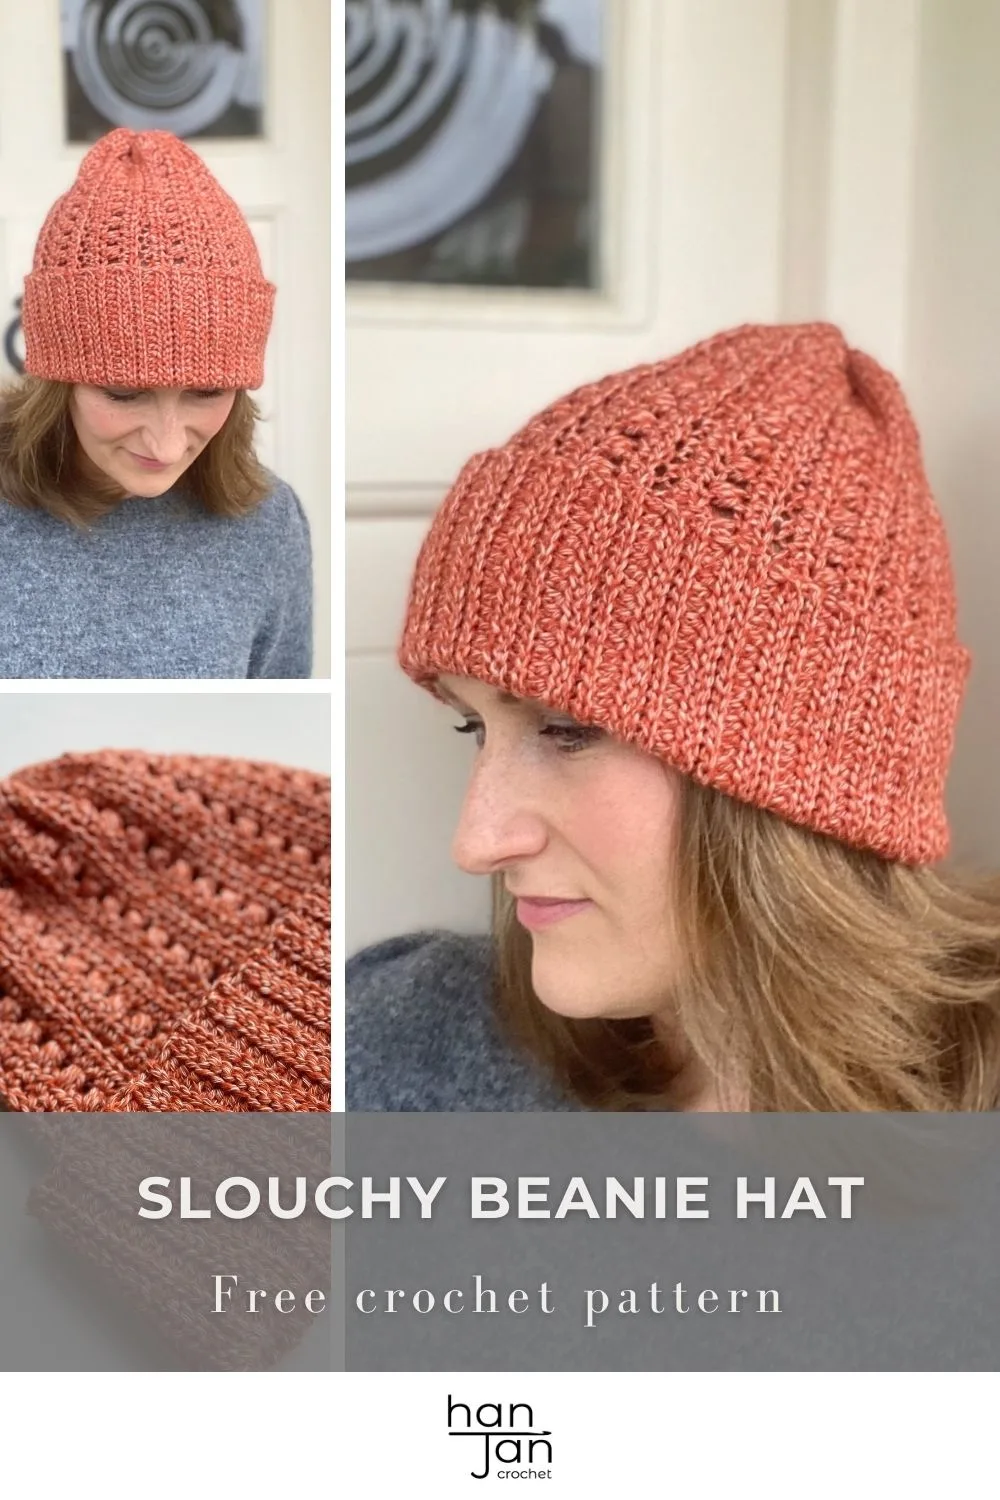 three images of slouchy crochet hat pattern being worn by woman and stitch detail